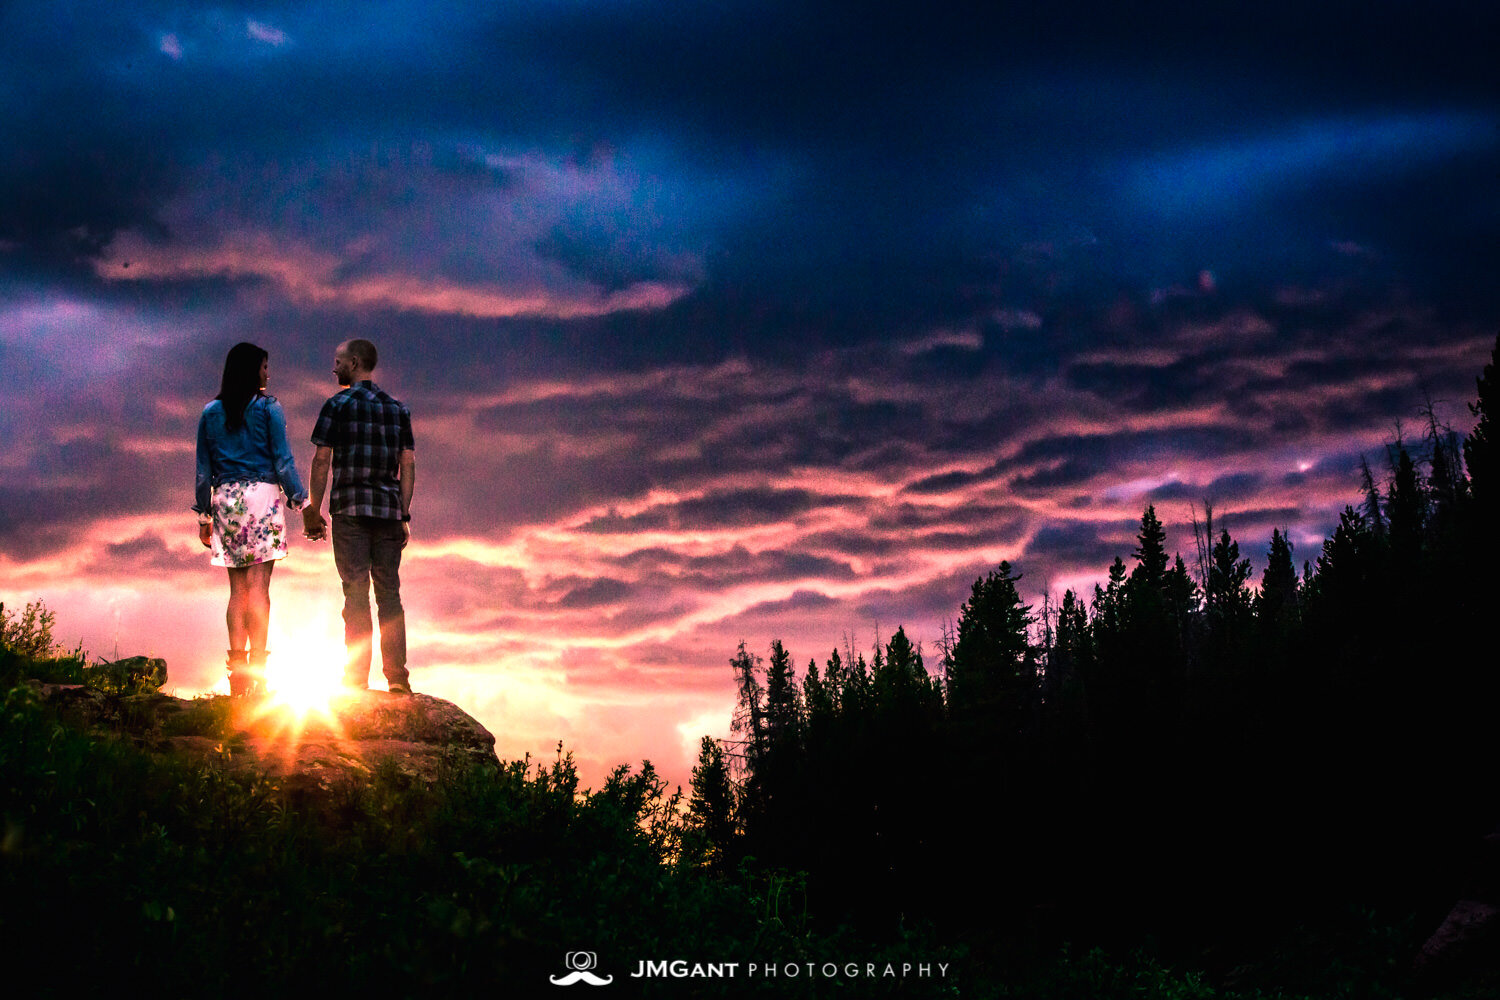  Vail Colorado Engagement Photography by JMGant Photography 